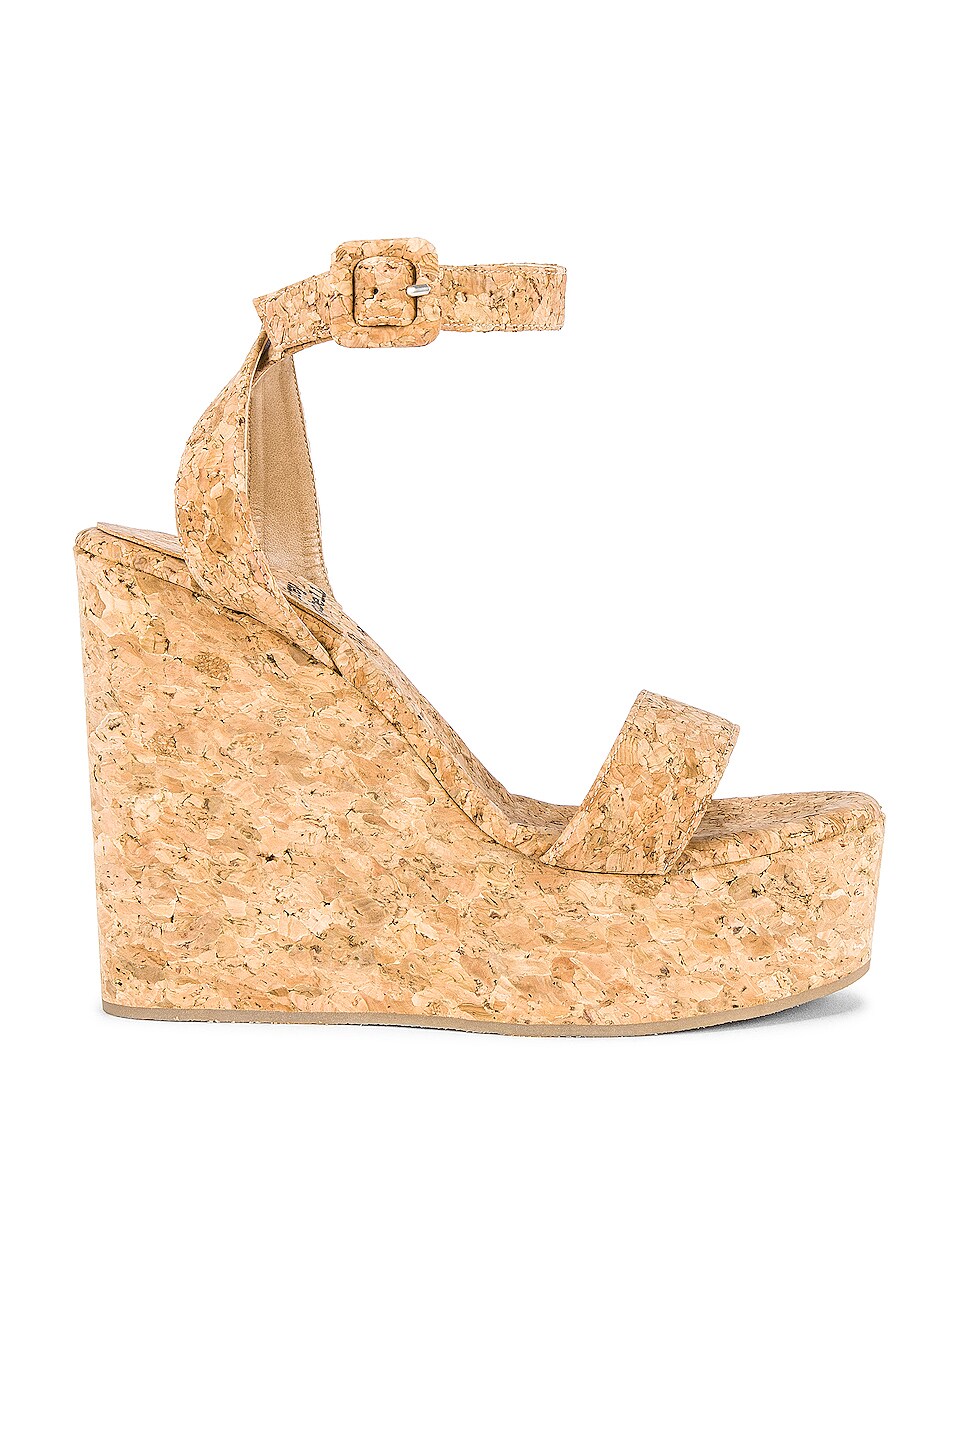 Jeffrey Campbell Channel Wedge Sandals